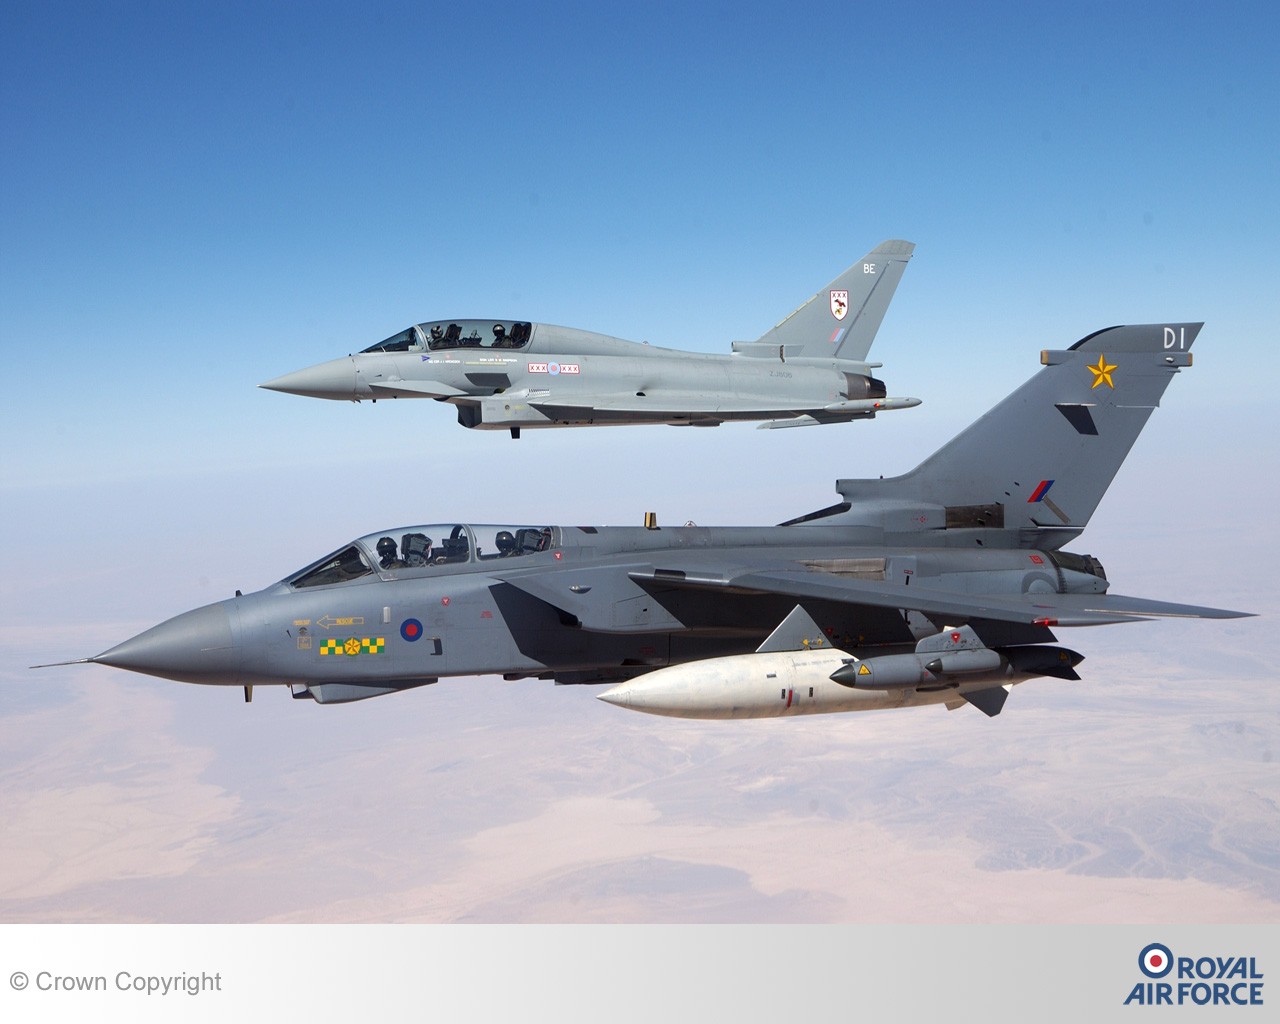 General 1280x1024 Panavia Tornado jet fighter airplane aircraft sky Eurofighter Typhoon military aircraft vehicle military watermarked Royal Air Force